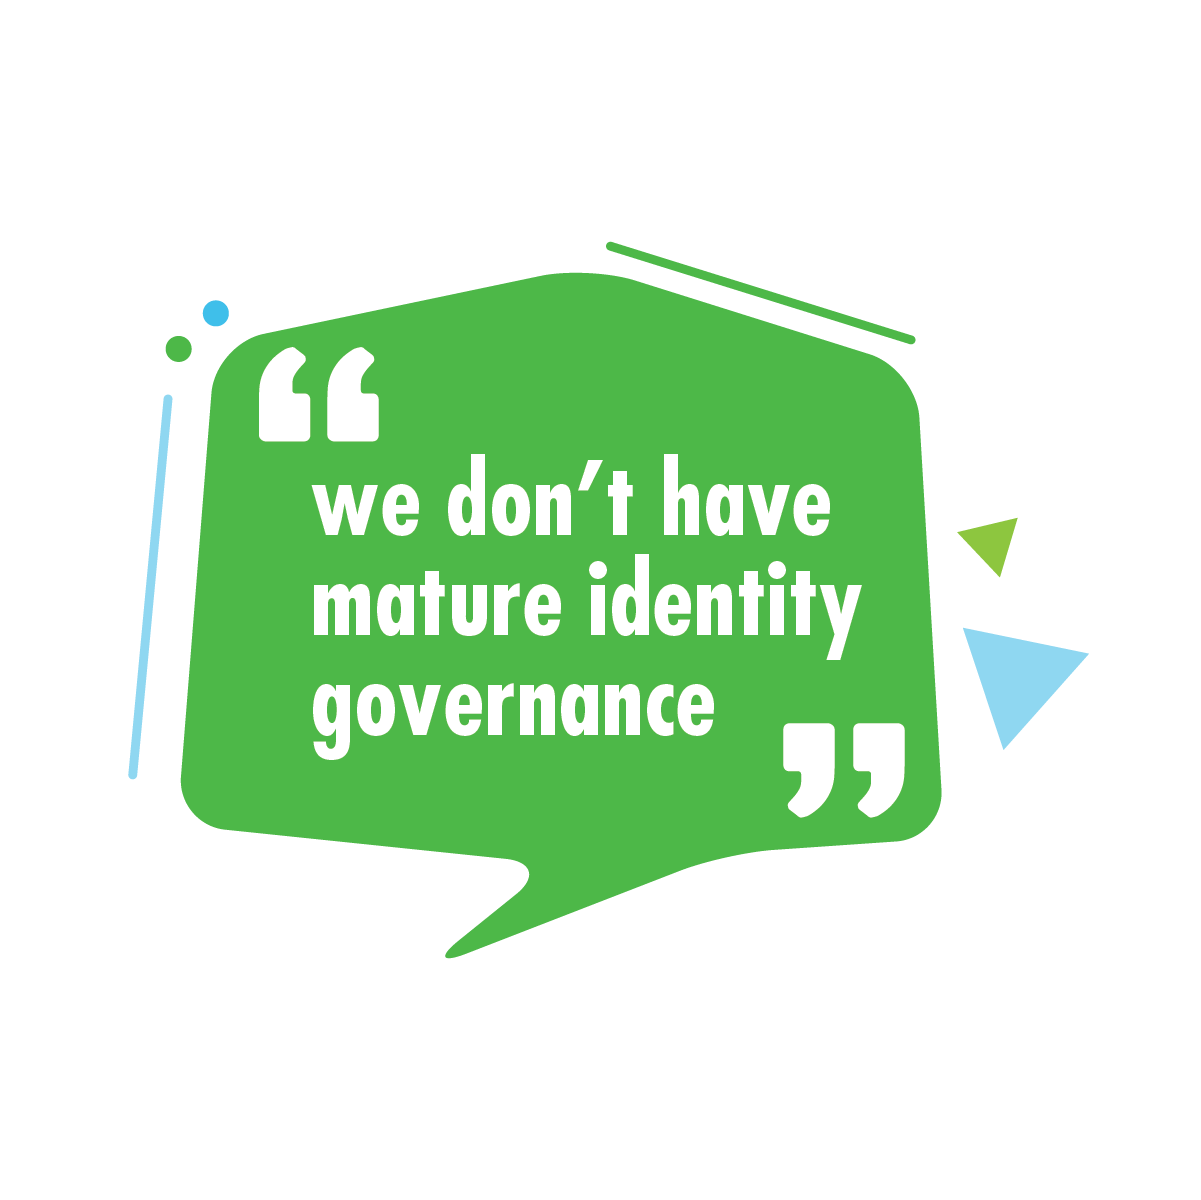 "We don't have mature identity governance."